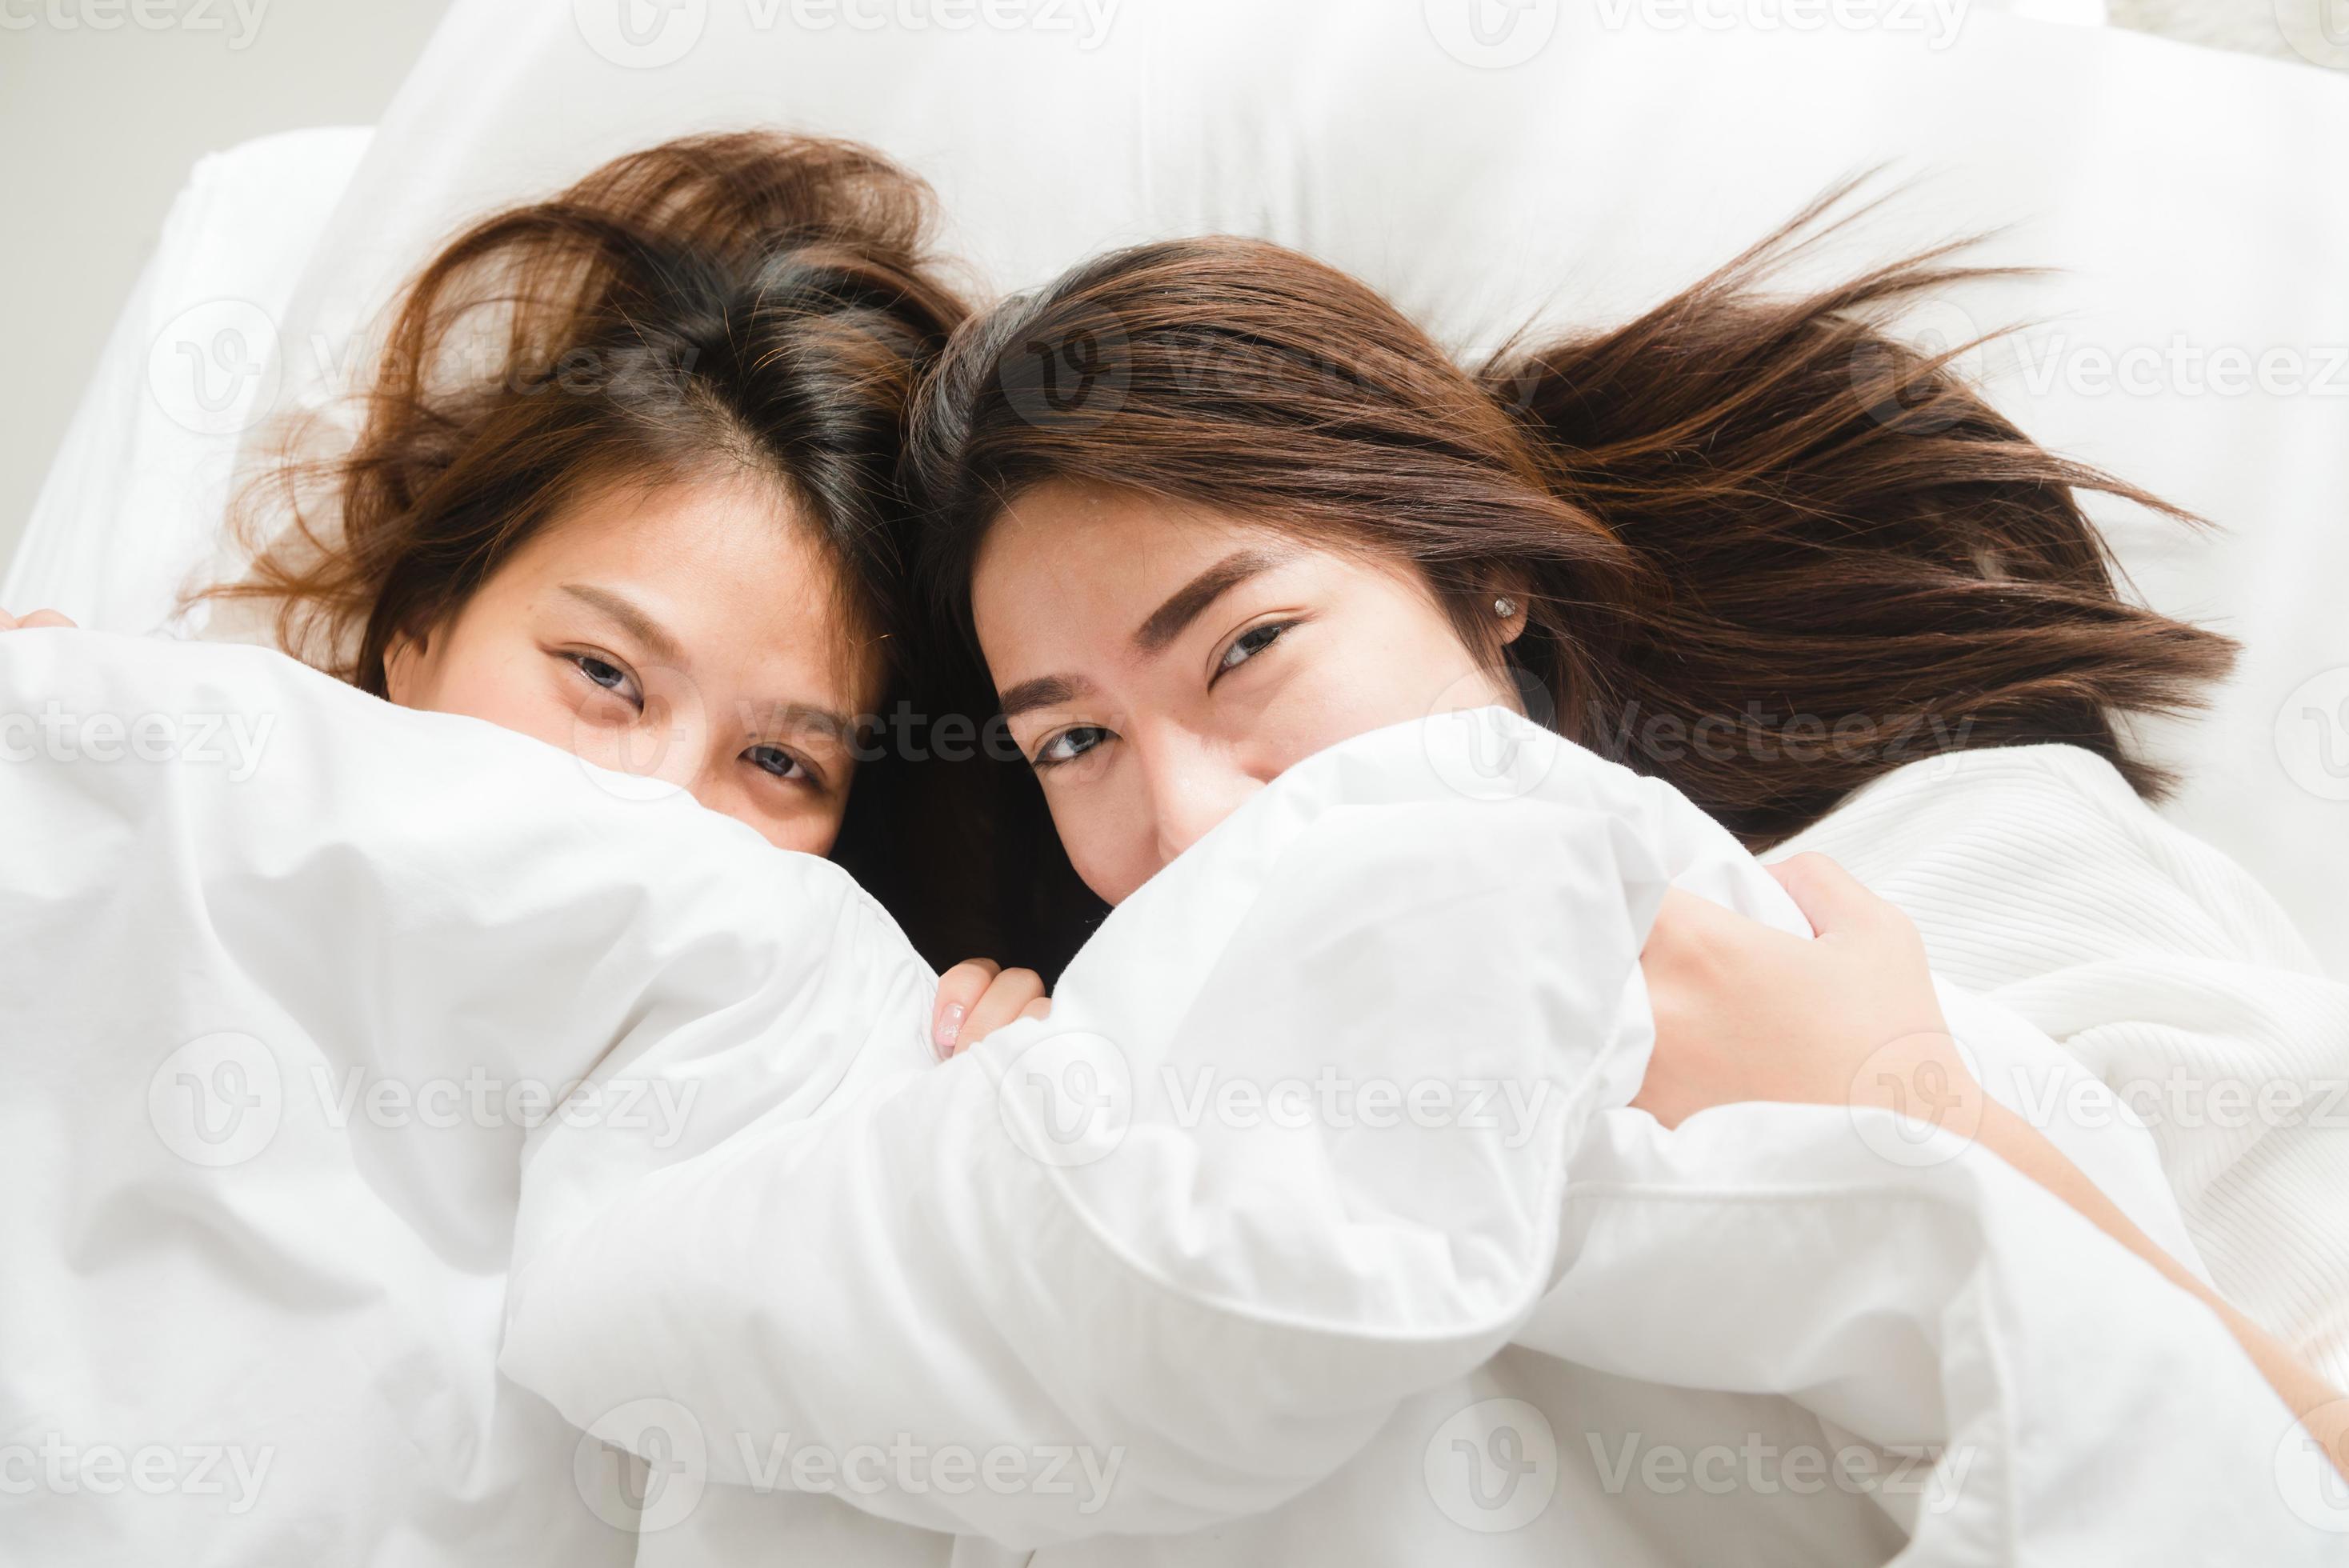 Beautiful young asian women LGBT lesbian happy couple hugging and smiling while lying together in bed under blanket at home. Funny women after wake up image